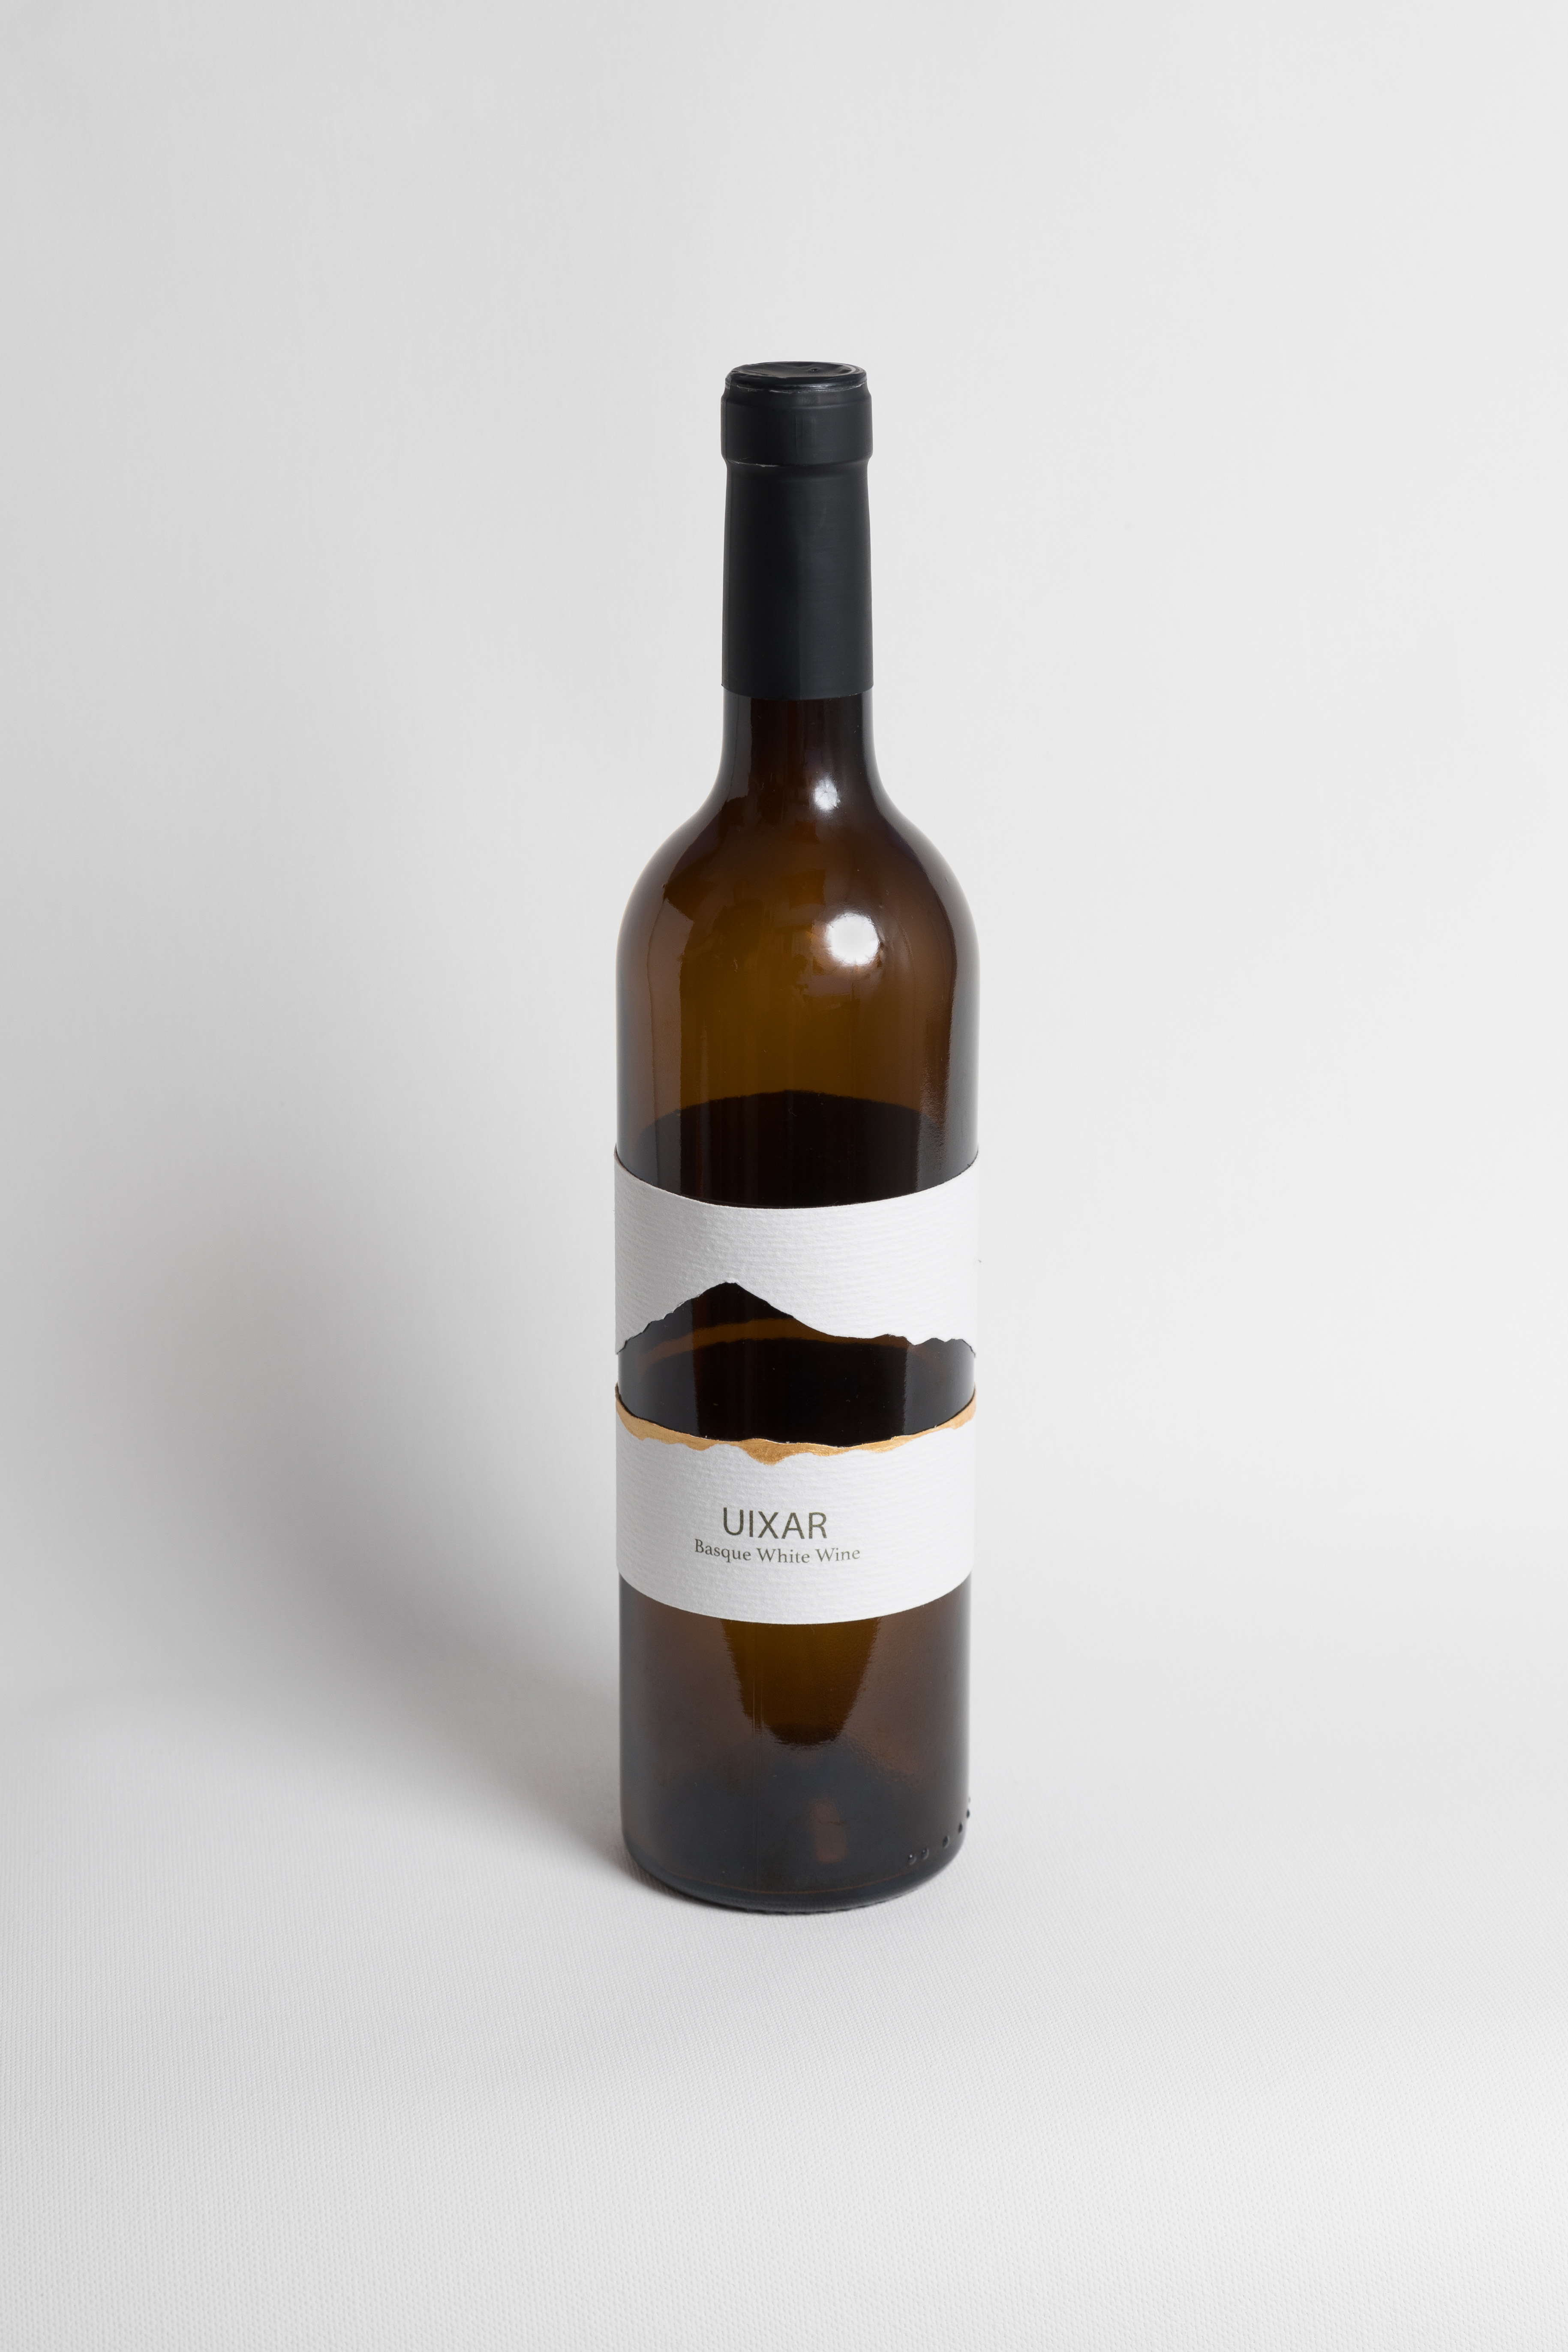 Label and packaging design for Txakoli Uixar by Laura Freijo - Creative Work - $i